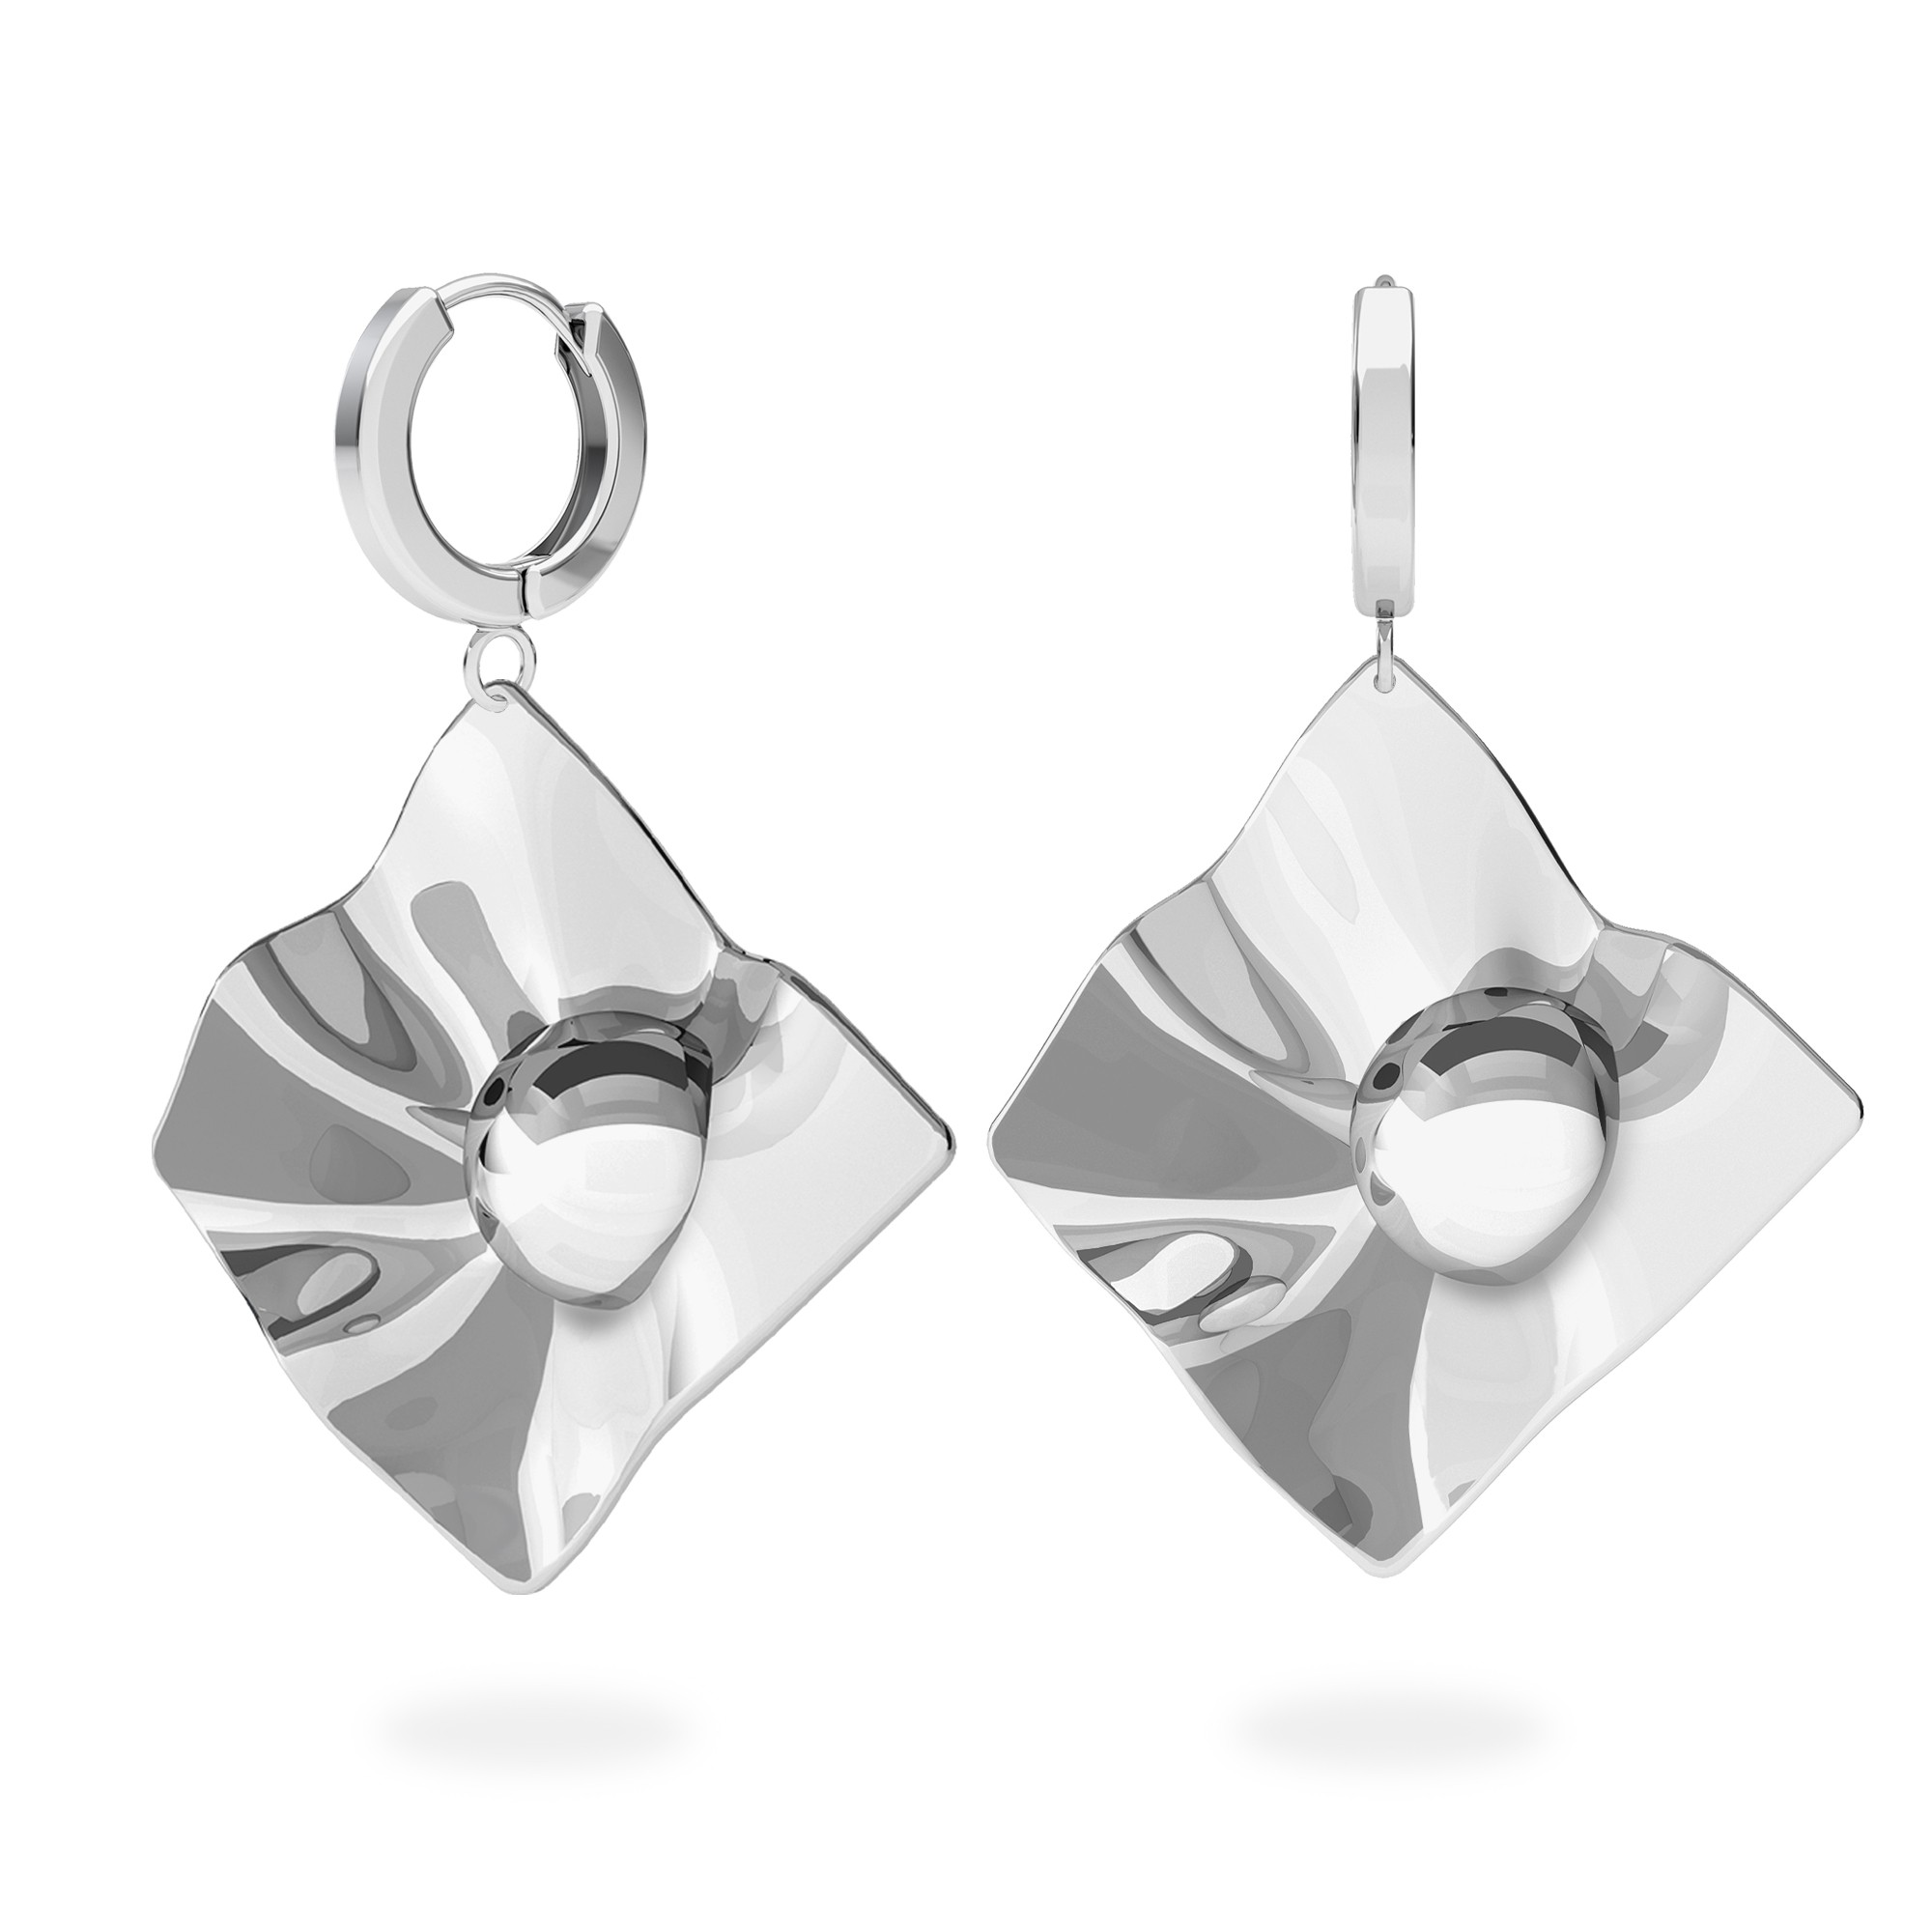 Square earrings sterling silver 925